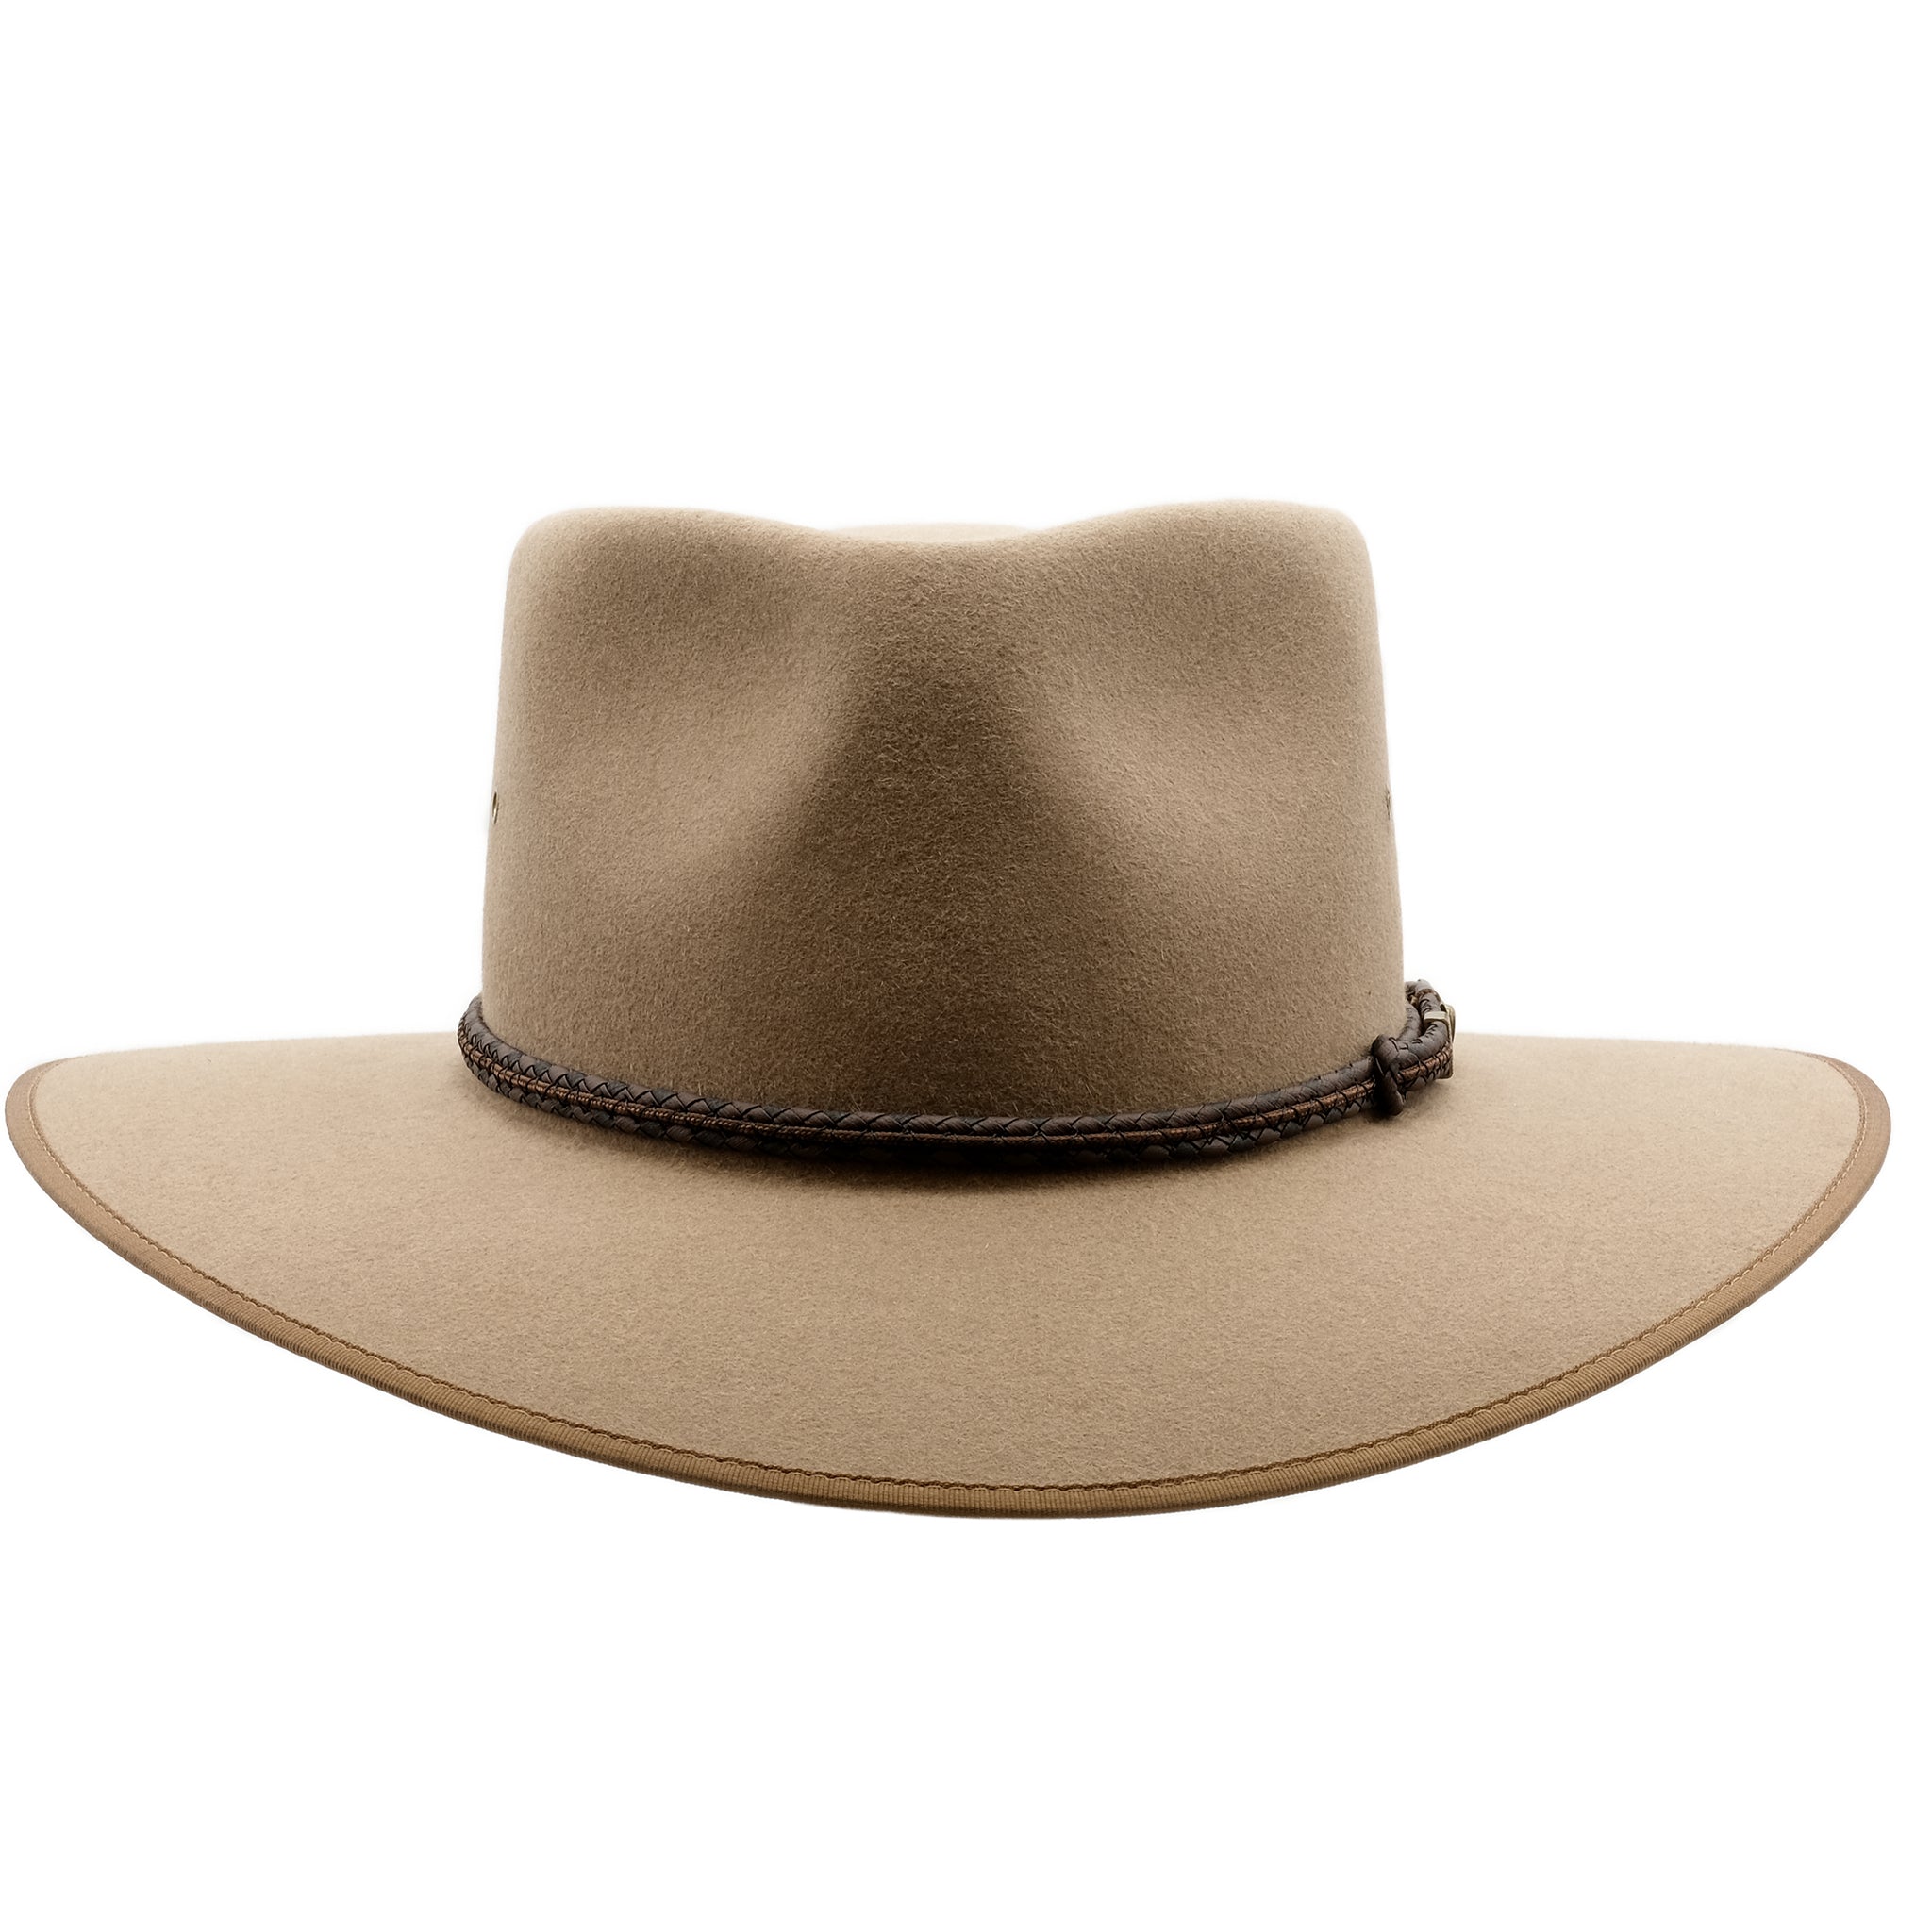 Front view of the Akubra Cattleman hat in Bran colour